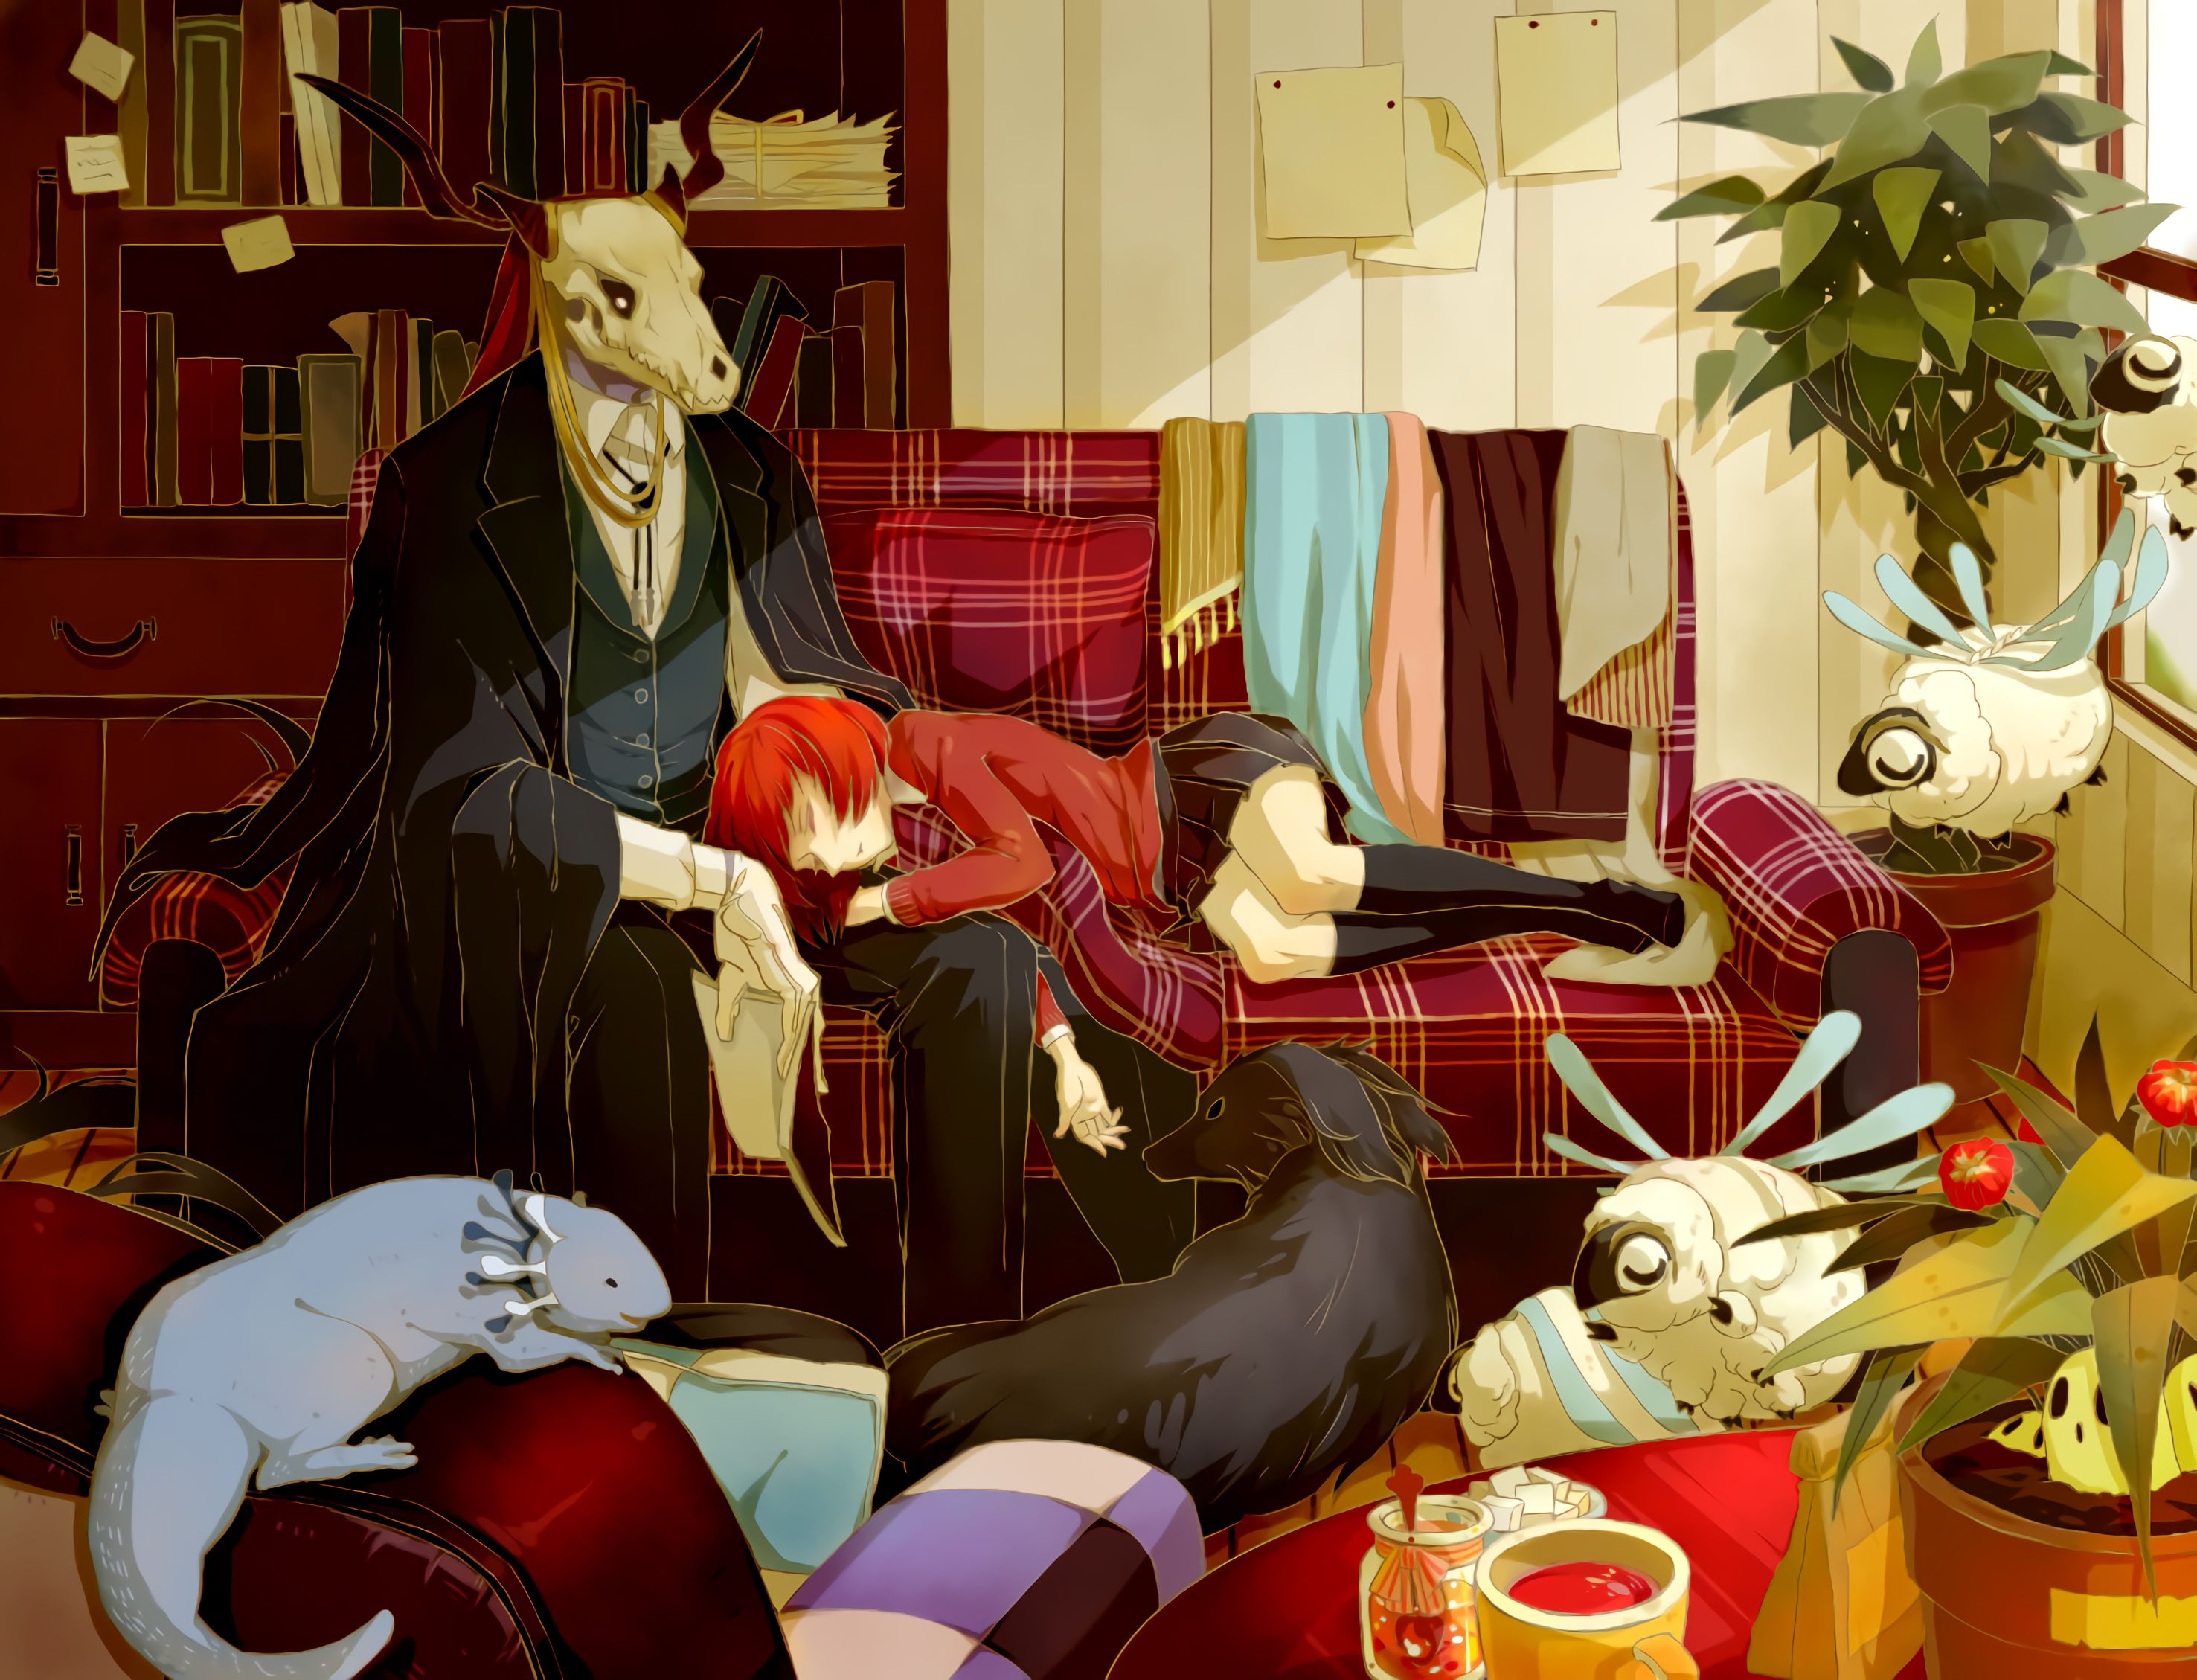 The Ancient Magus' Bride Season 2 streaming on Crunchyroll in April 2023:  Watch the Mahoutsukai no Yome S2 trailer